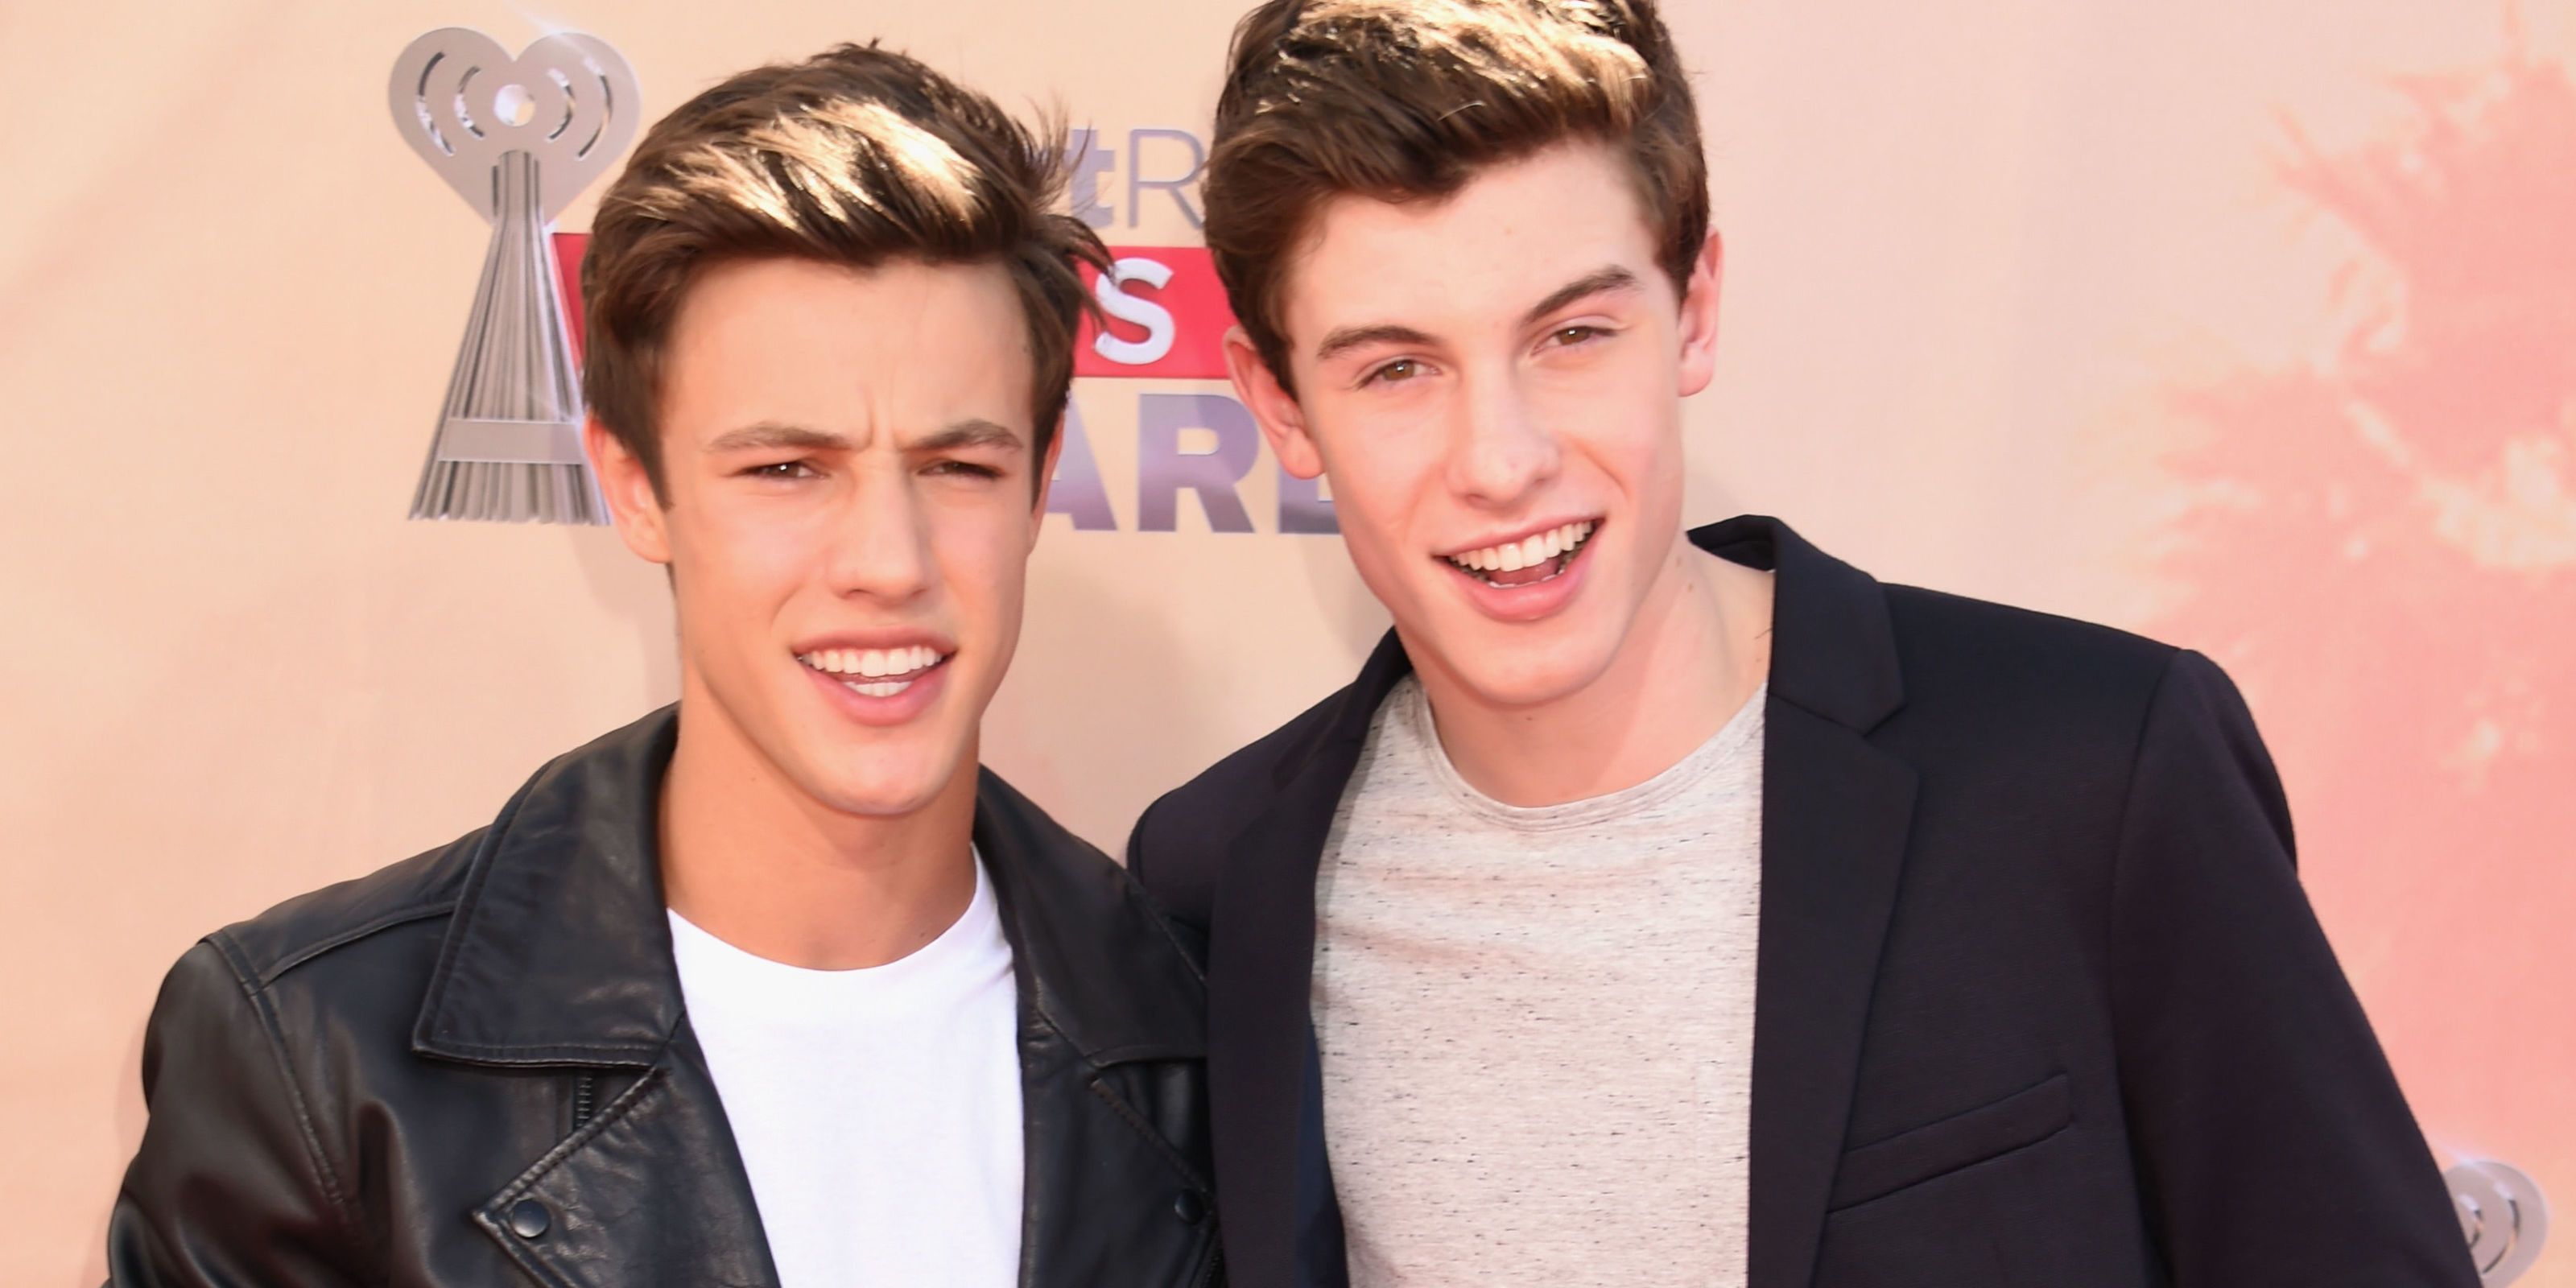 did cameron dallas dating shawn mendes